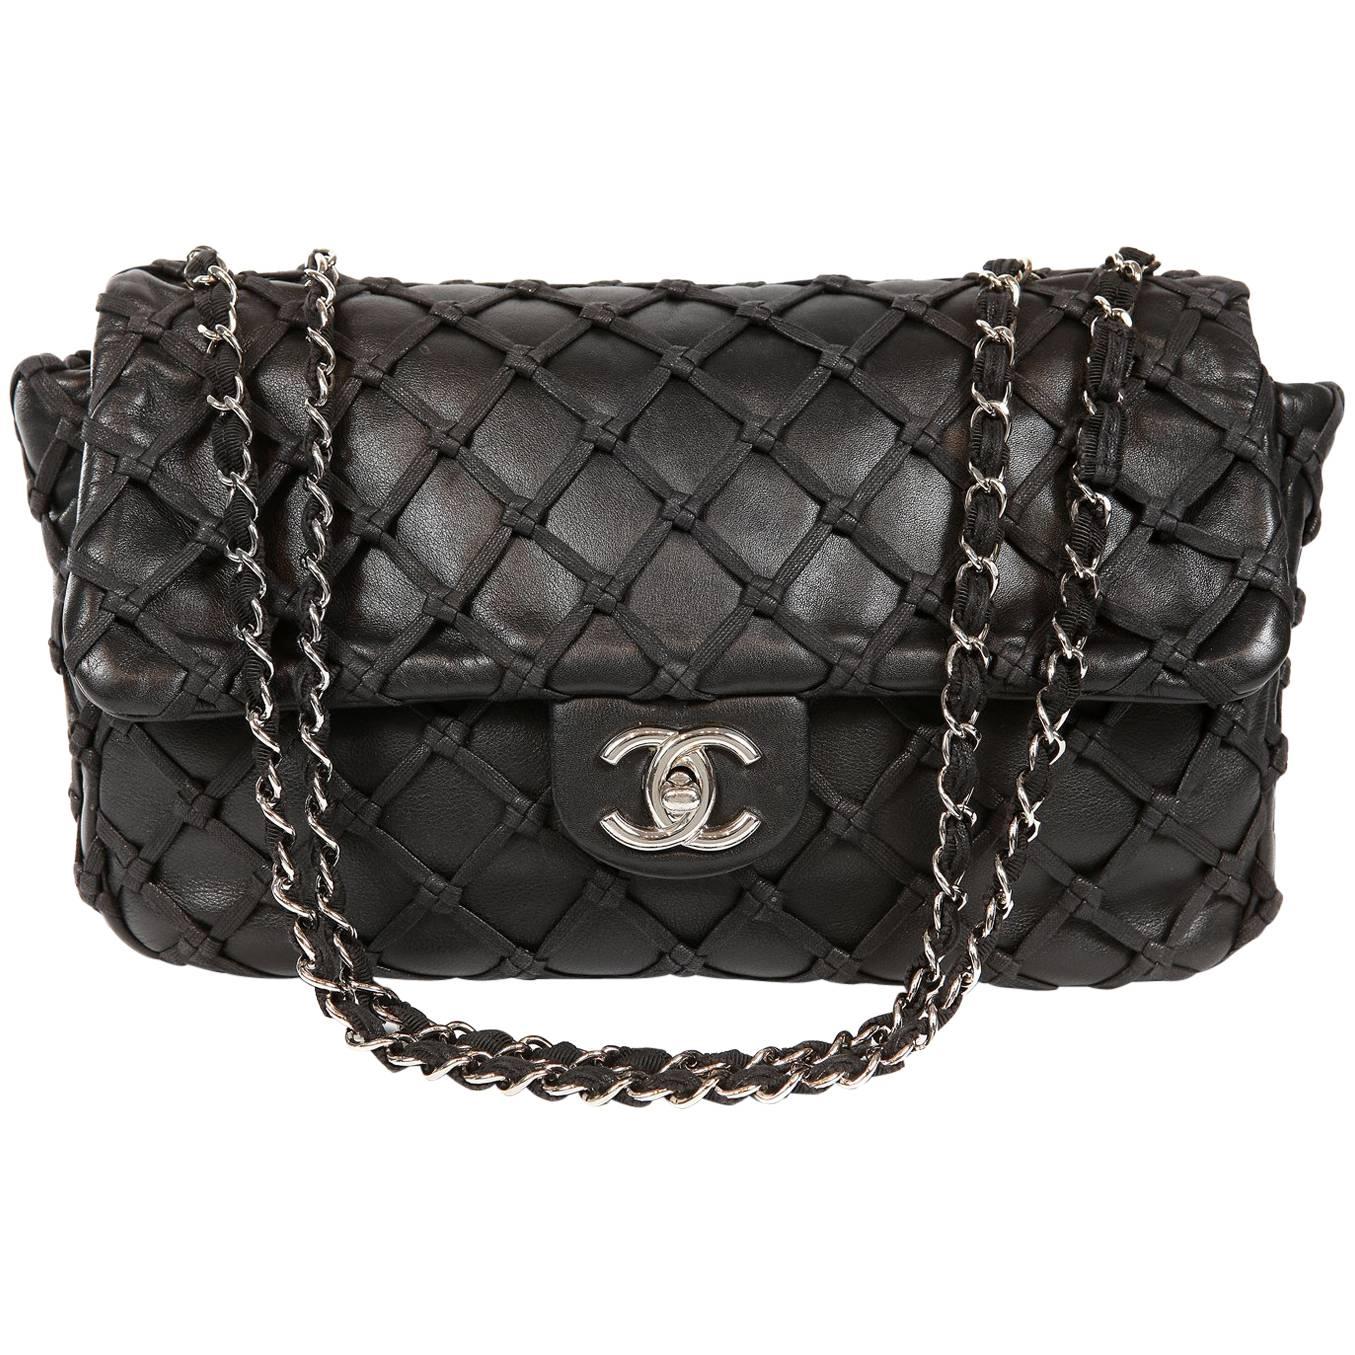 Chanel Black Leather Woven Top Stitch Classic Flap Bag